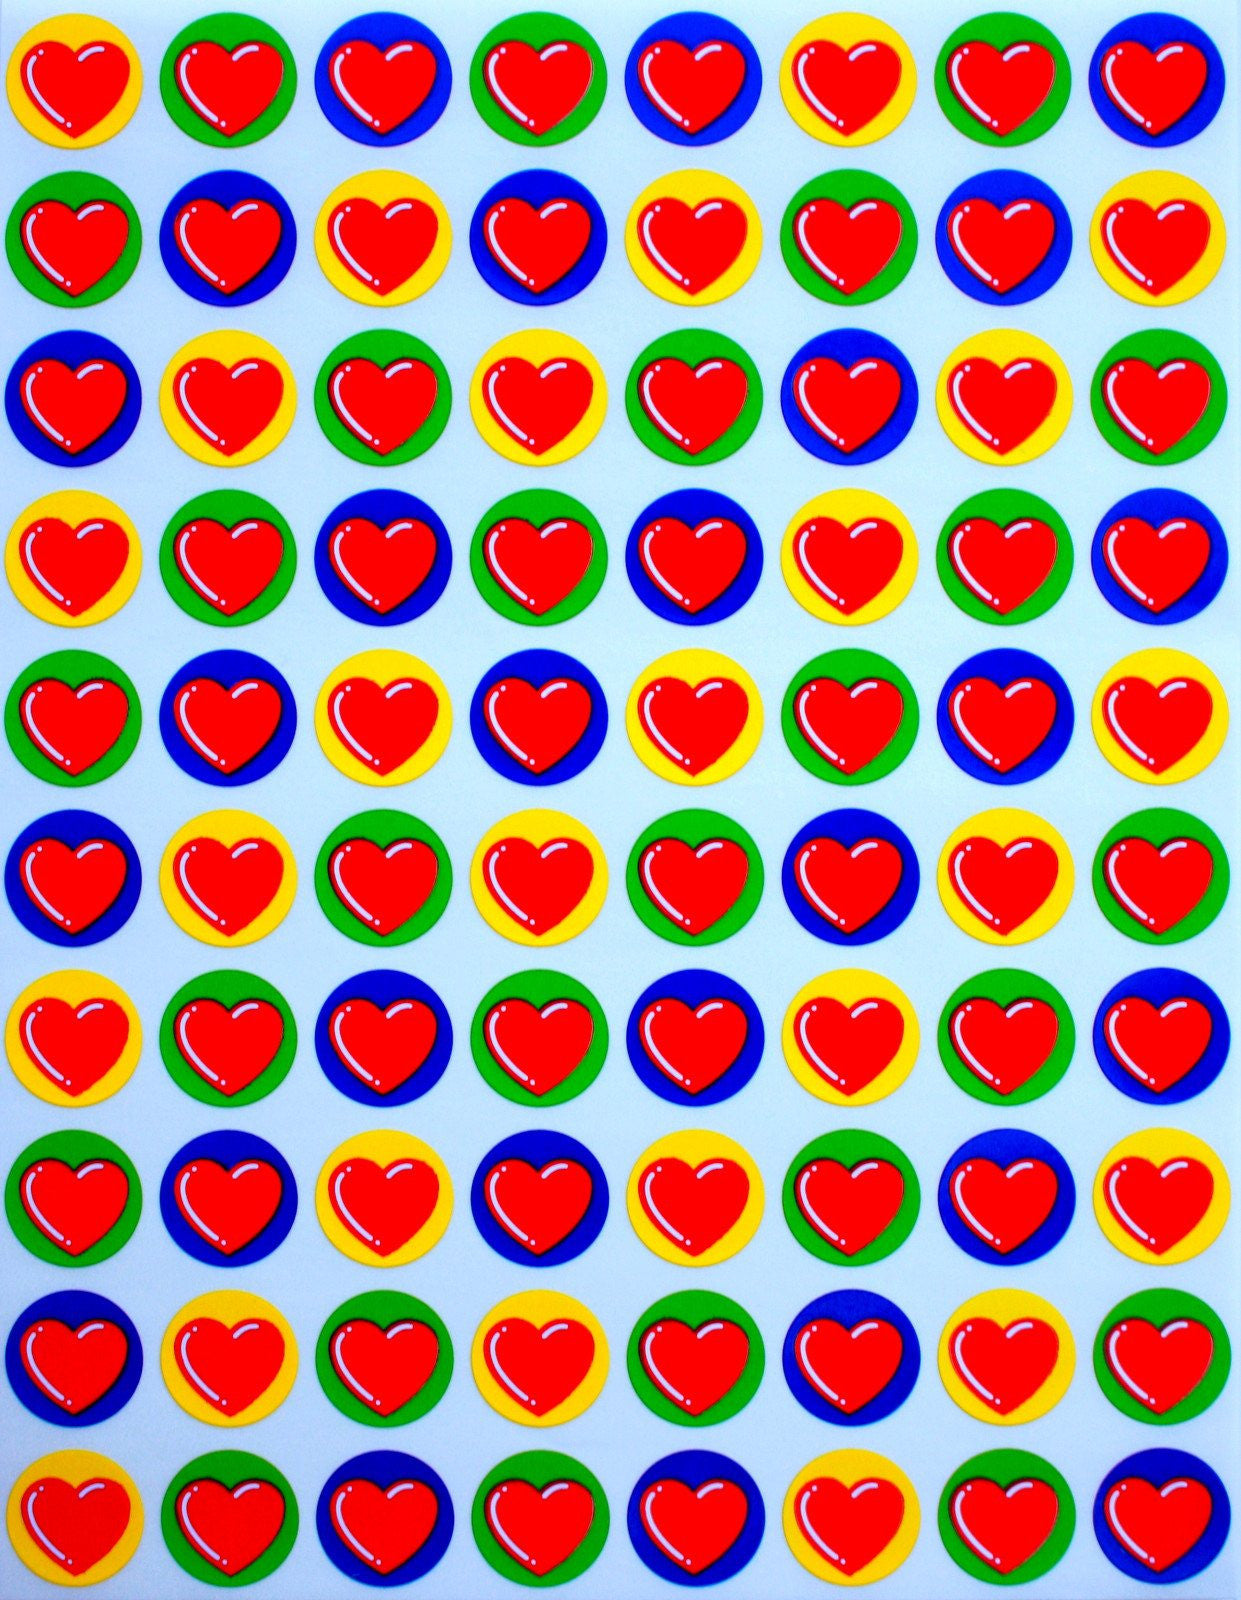 Heart Shaped Stickers in Red, Envelope Seals Hearts, One size